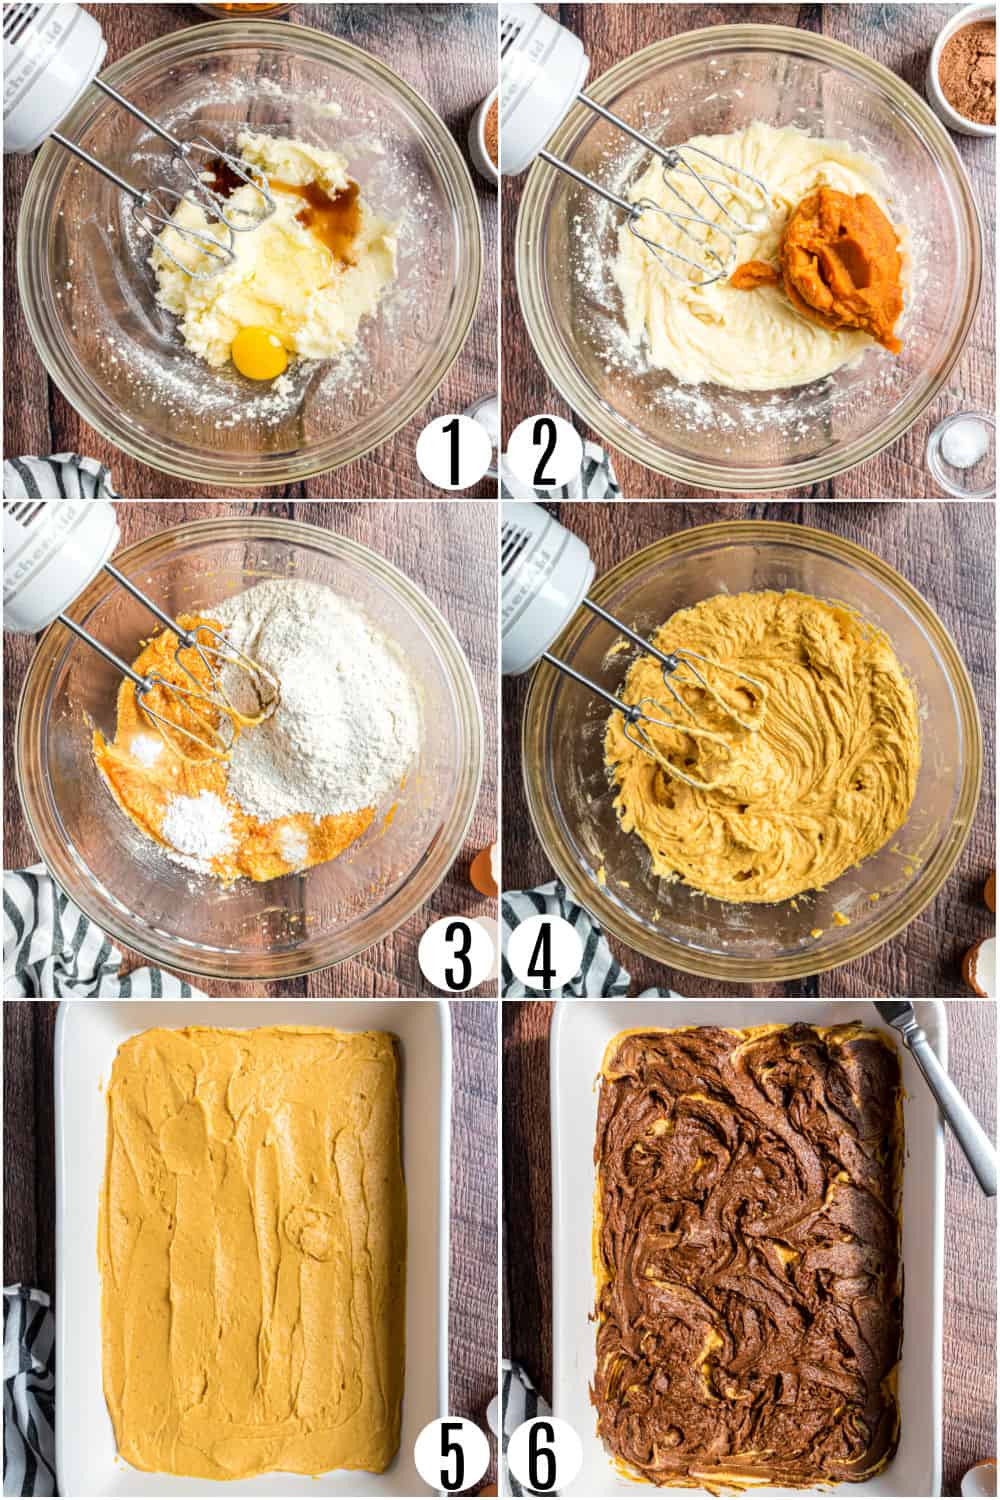 Step by step photos showing how to make chocolate pumpkin cake.